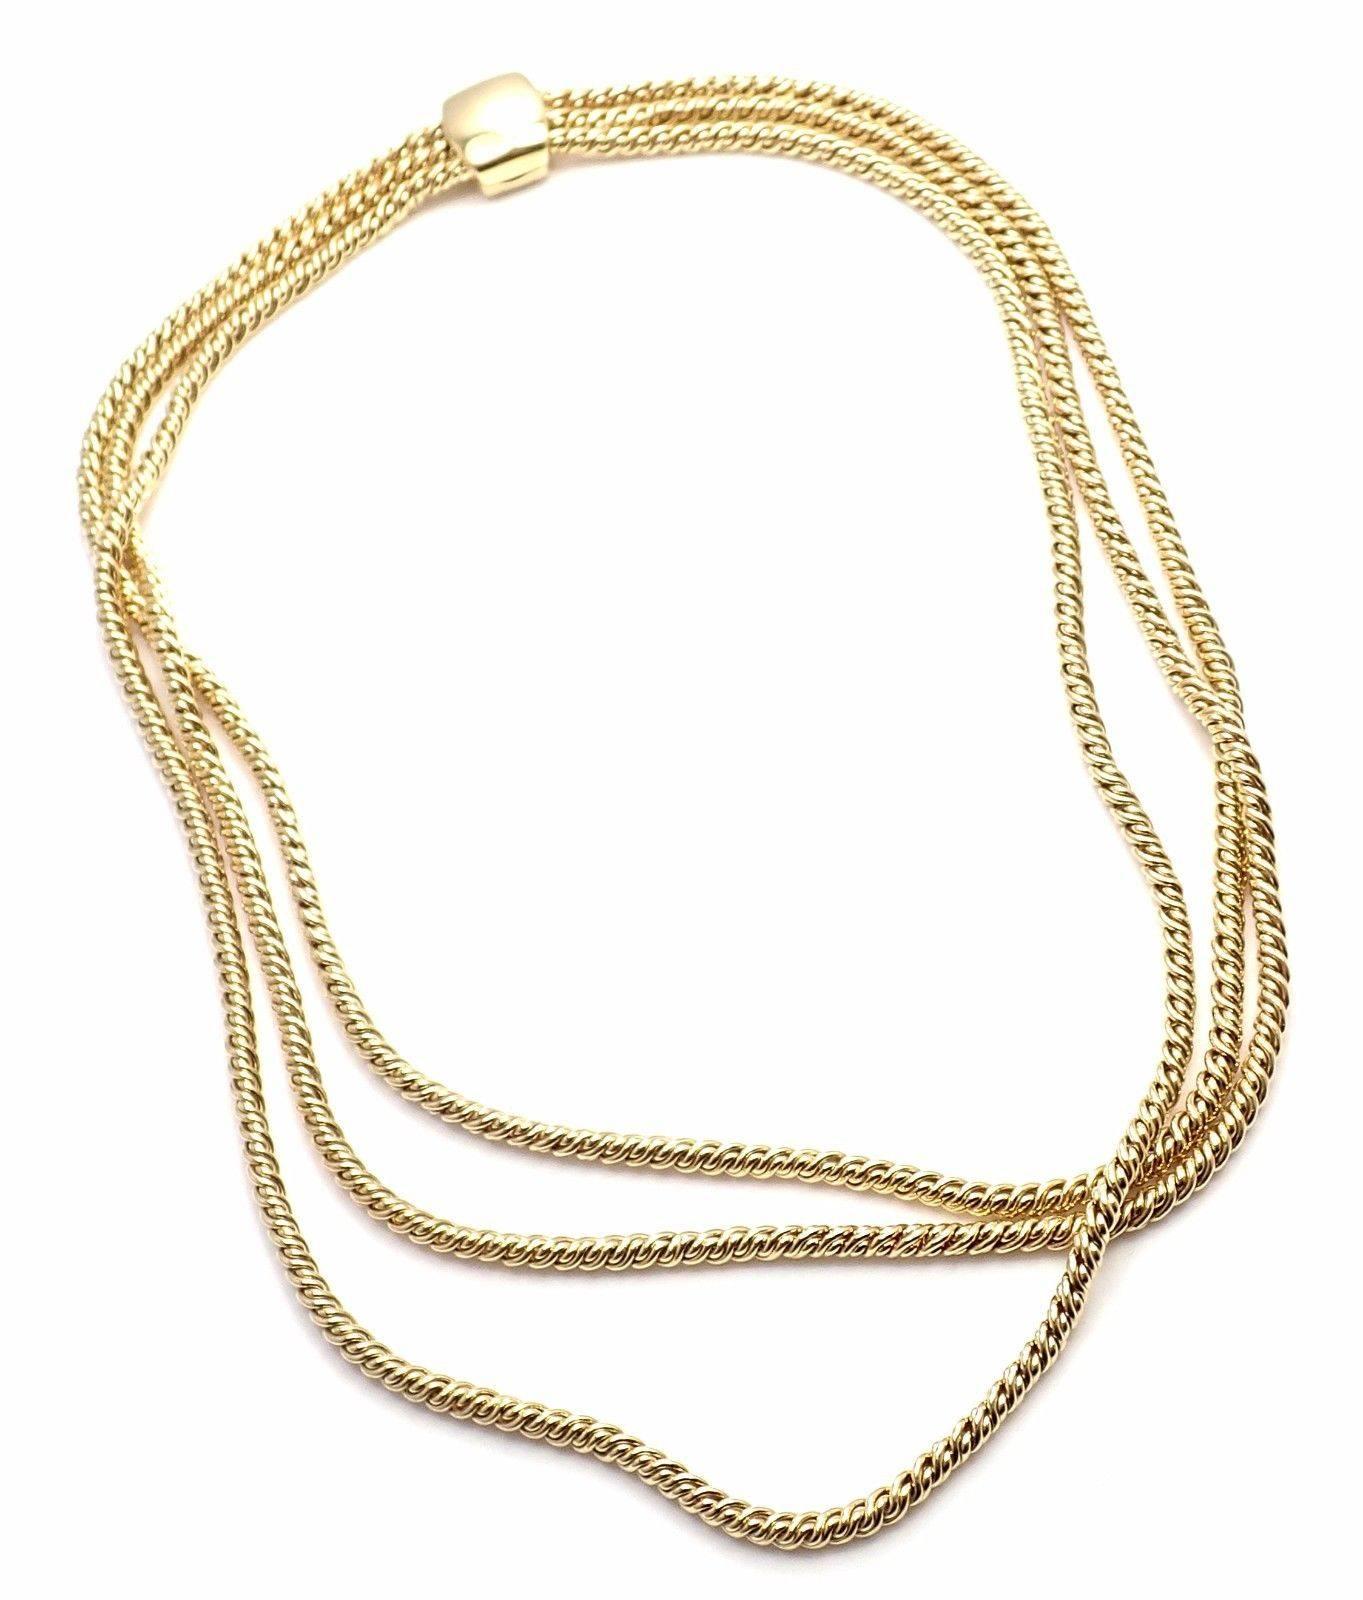 18k Yellow Gold Three Twisted Chains Necklace by Pomellato.
This necklace comes with original Pomellato box and a certificate.
Details: 
Weight: 94 grams
Length: 16